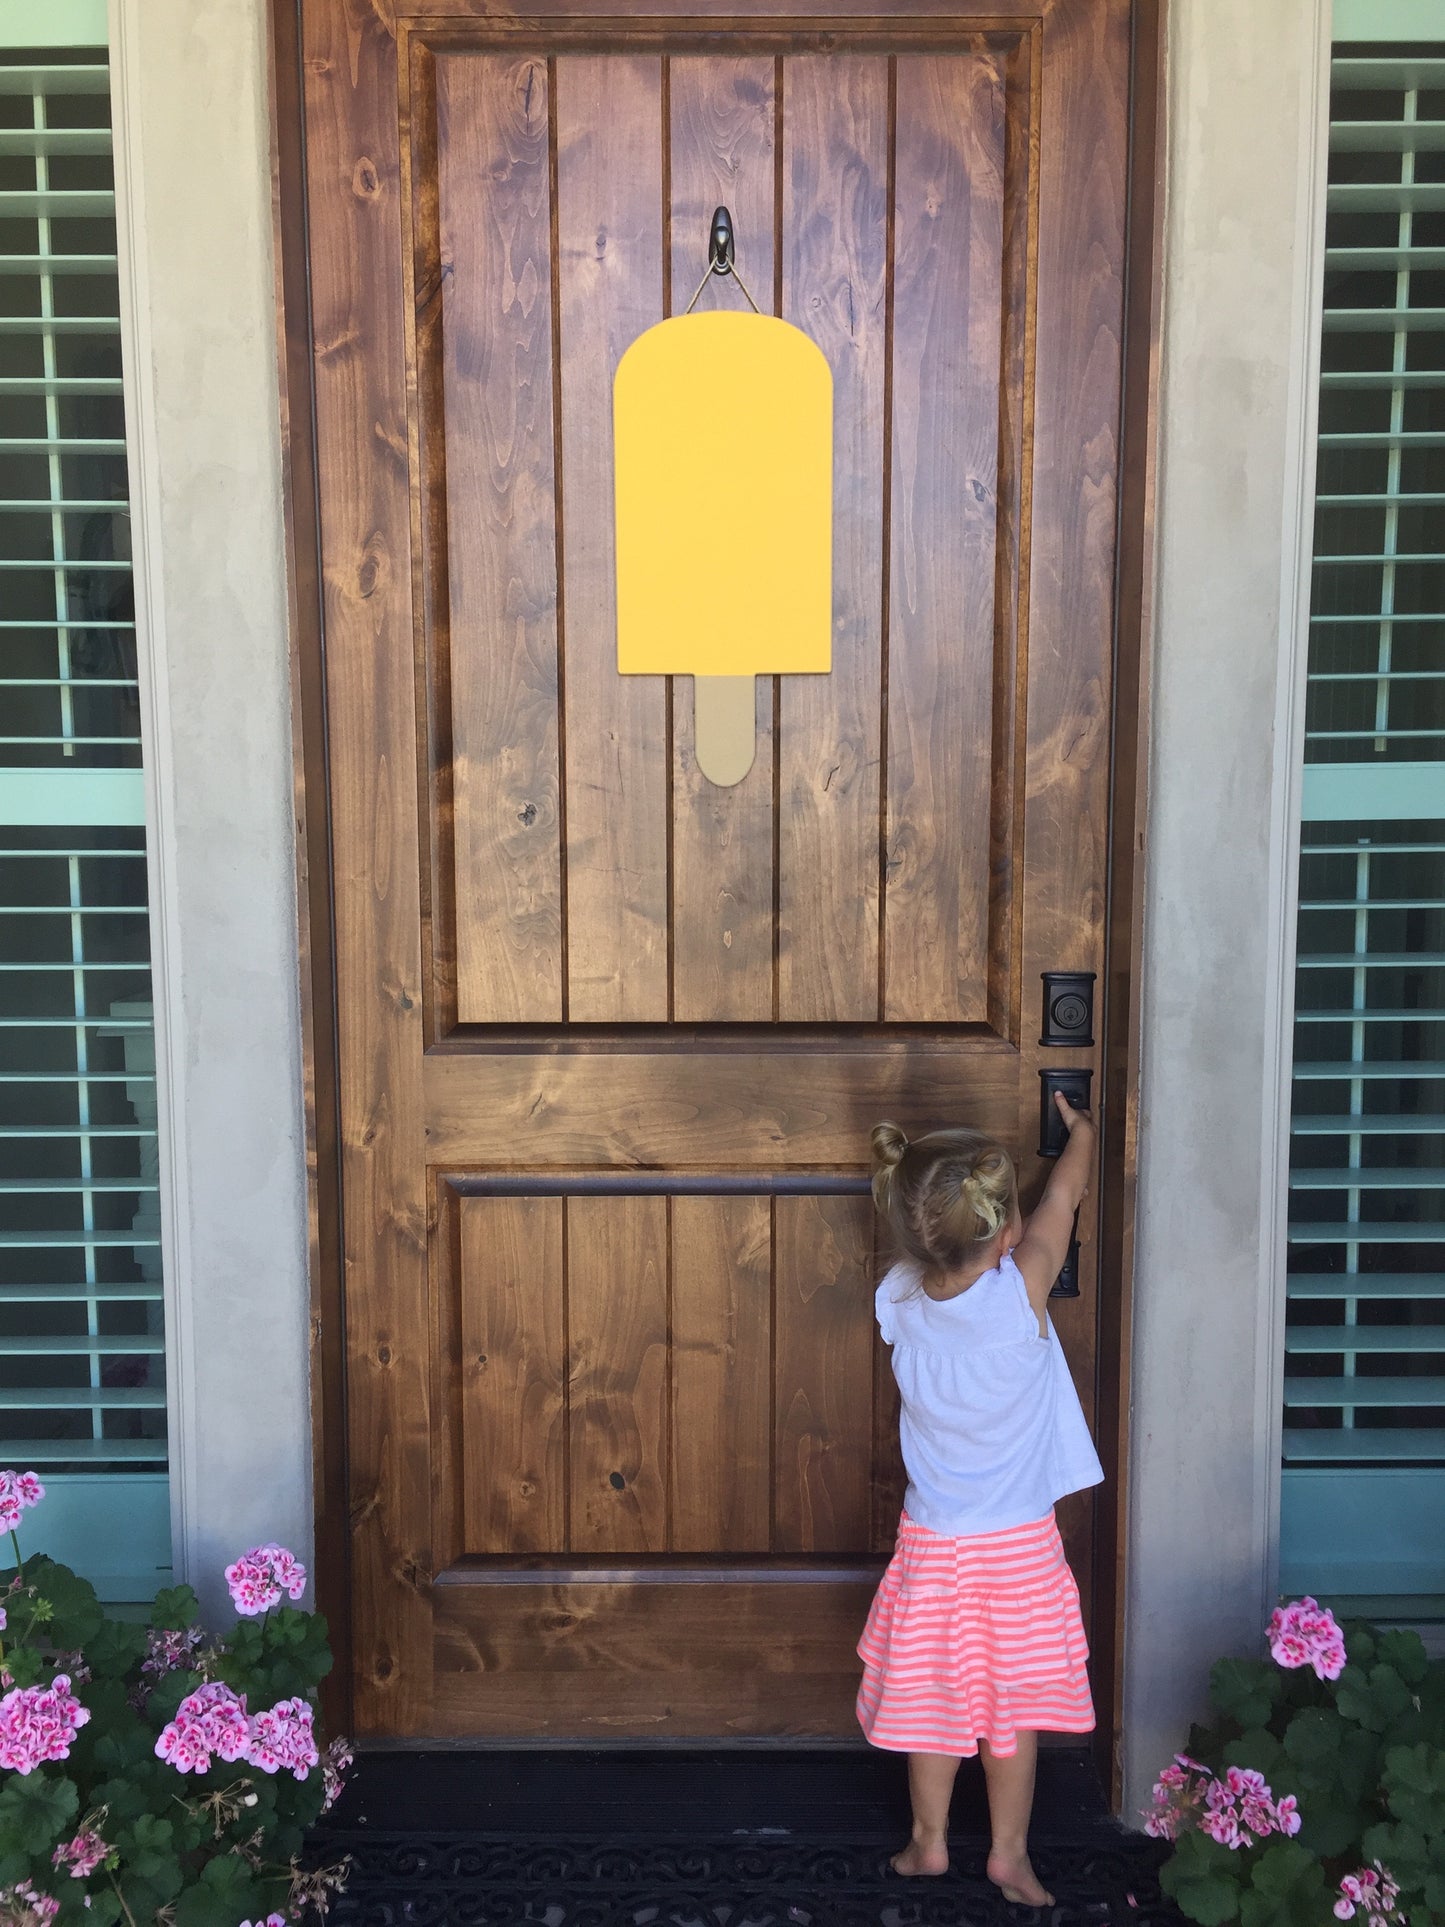 Charming Popsicle Door Sign – Sweet Summer Welcome Decor for a Fun Home Entrance